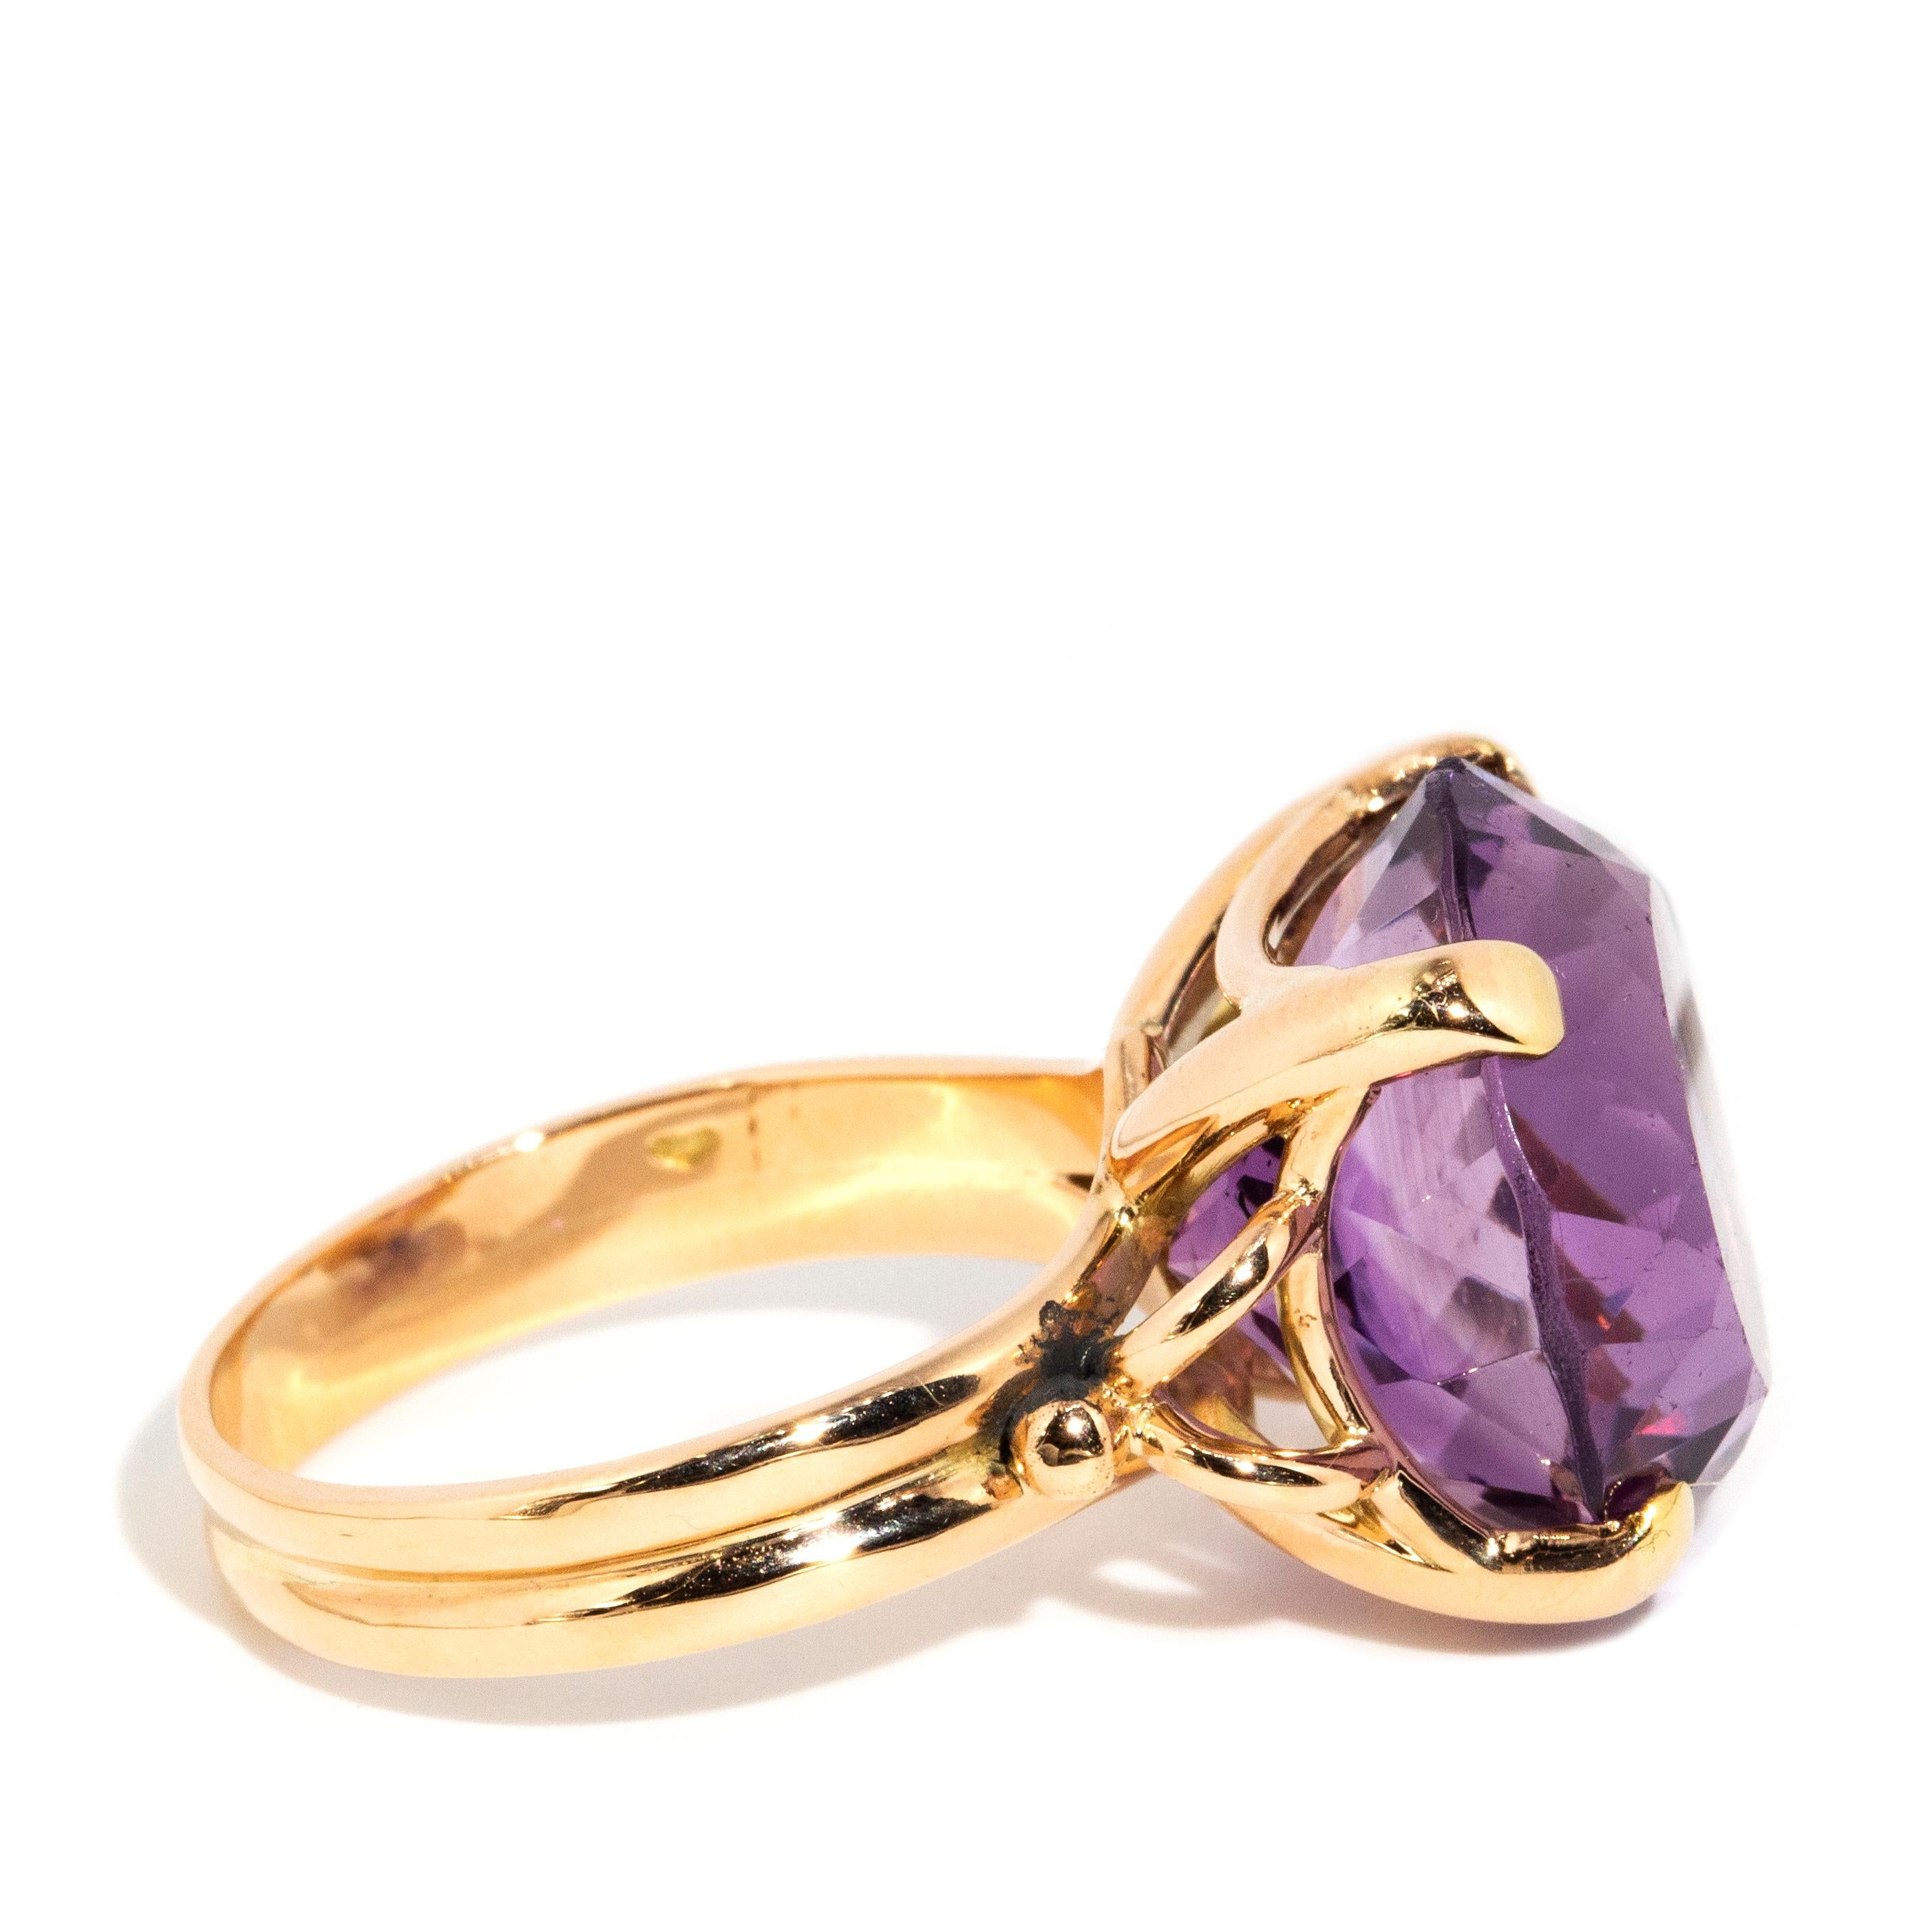 Women's Vintage Circa 1970s Round Amethyst Solitaire Cocktail Ring 14 Carat Yellow Gold For Sale